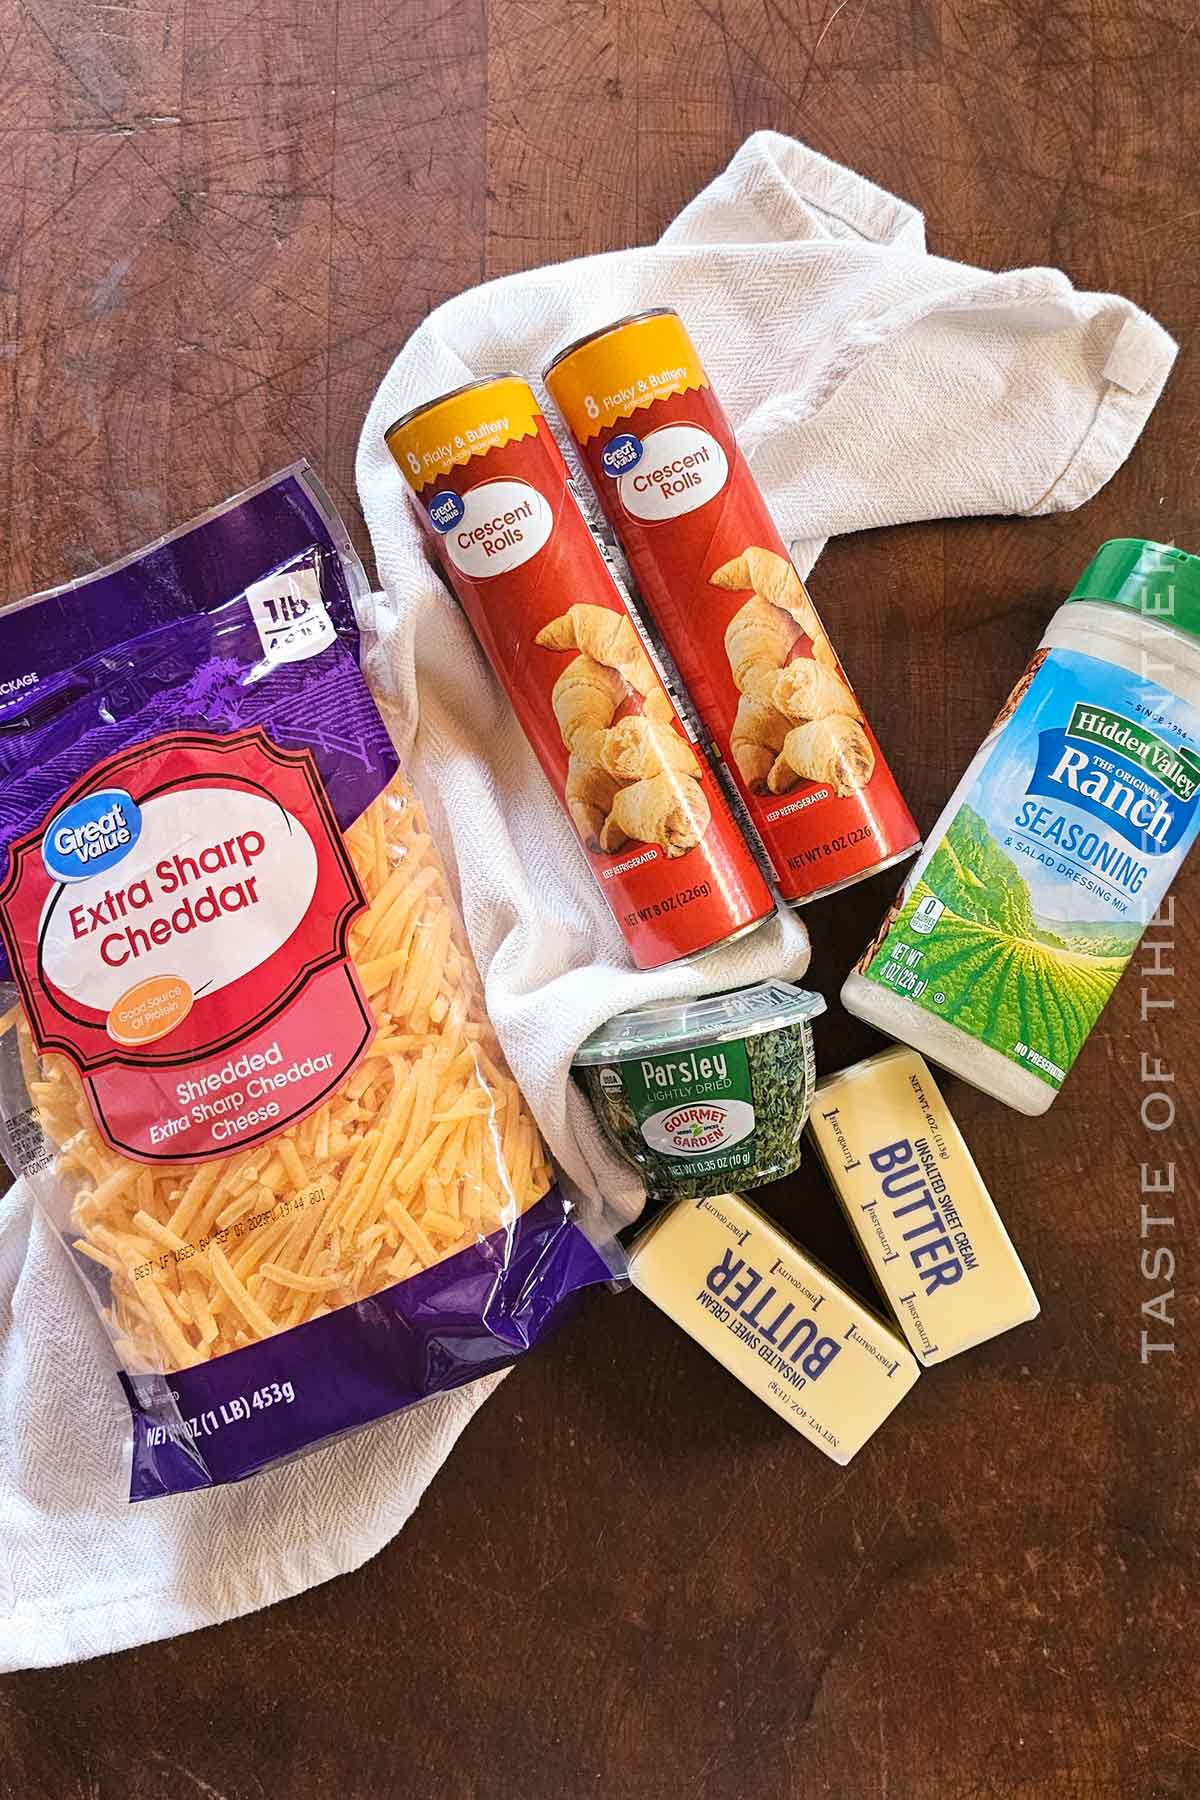 Ingredients for Cheddar Ranch Cruffins